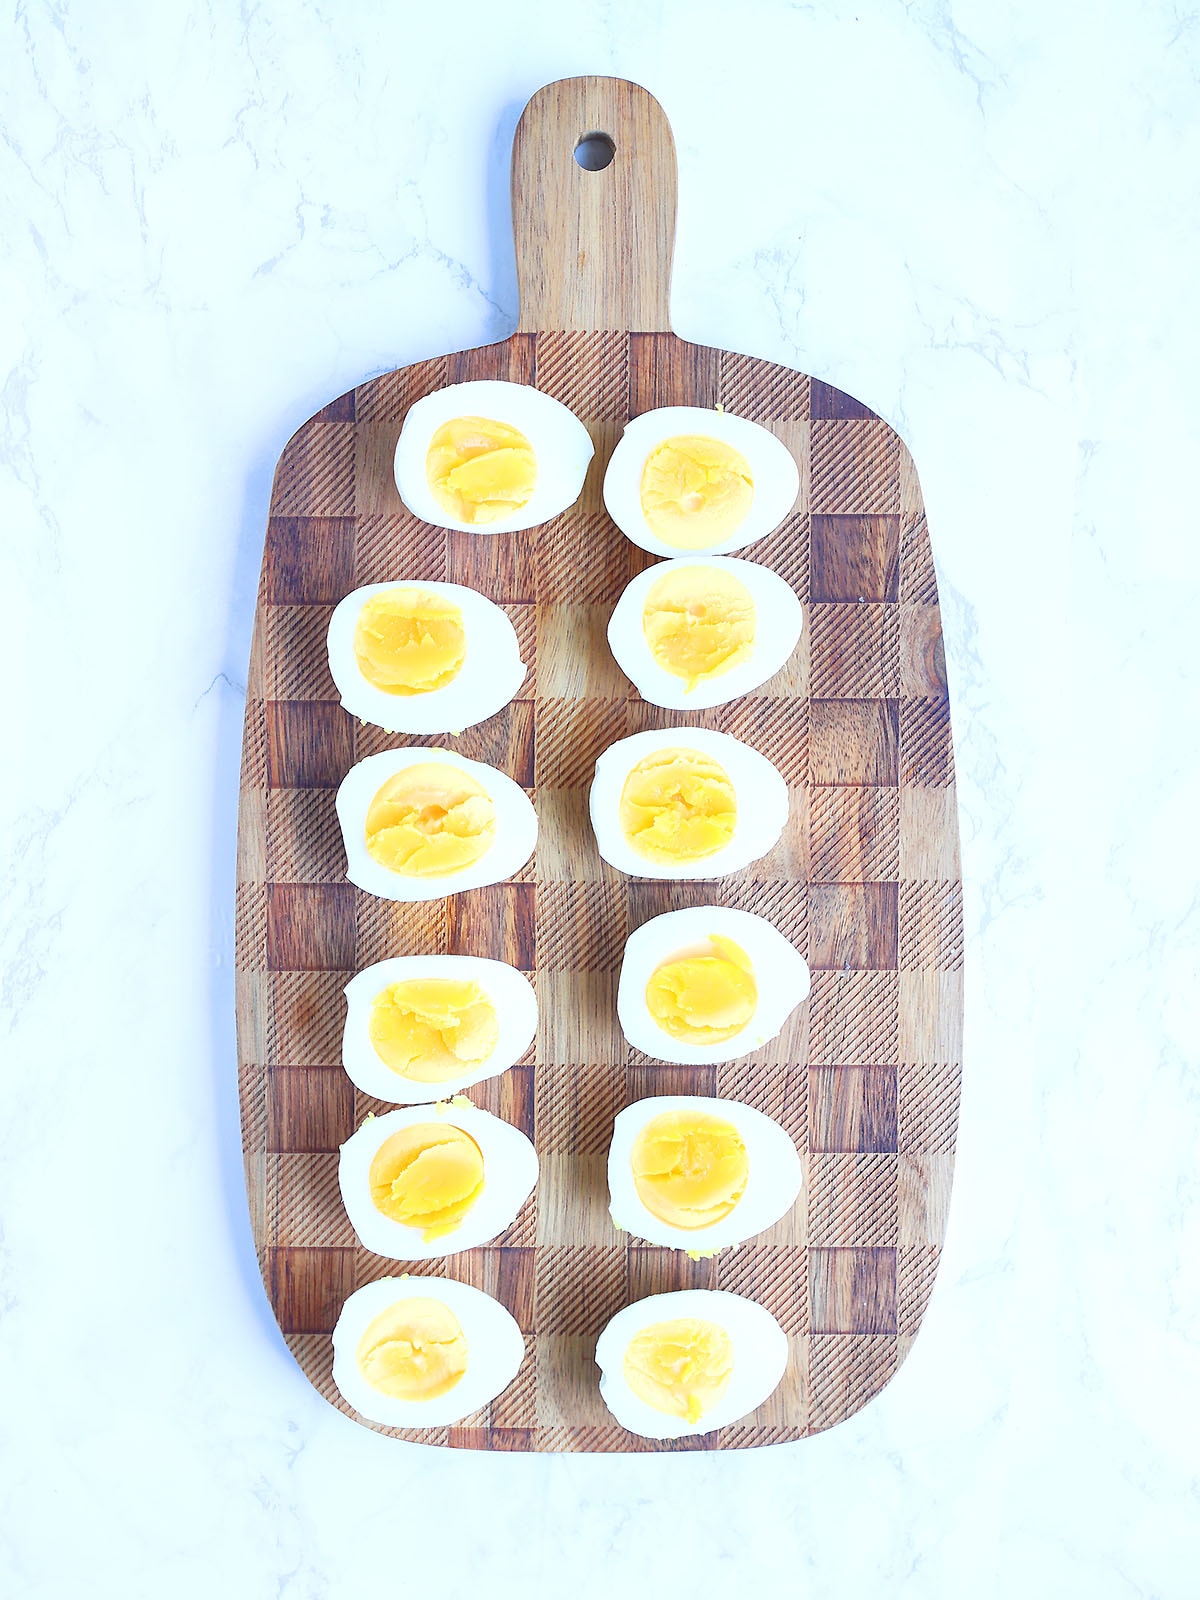 Six hardboiled eggs cut in half and laid out on a cutting board.